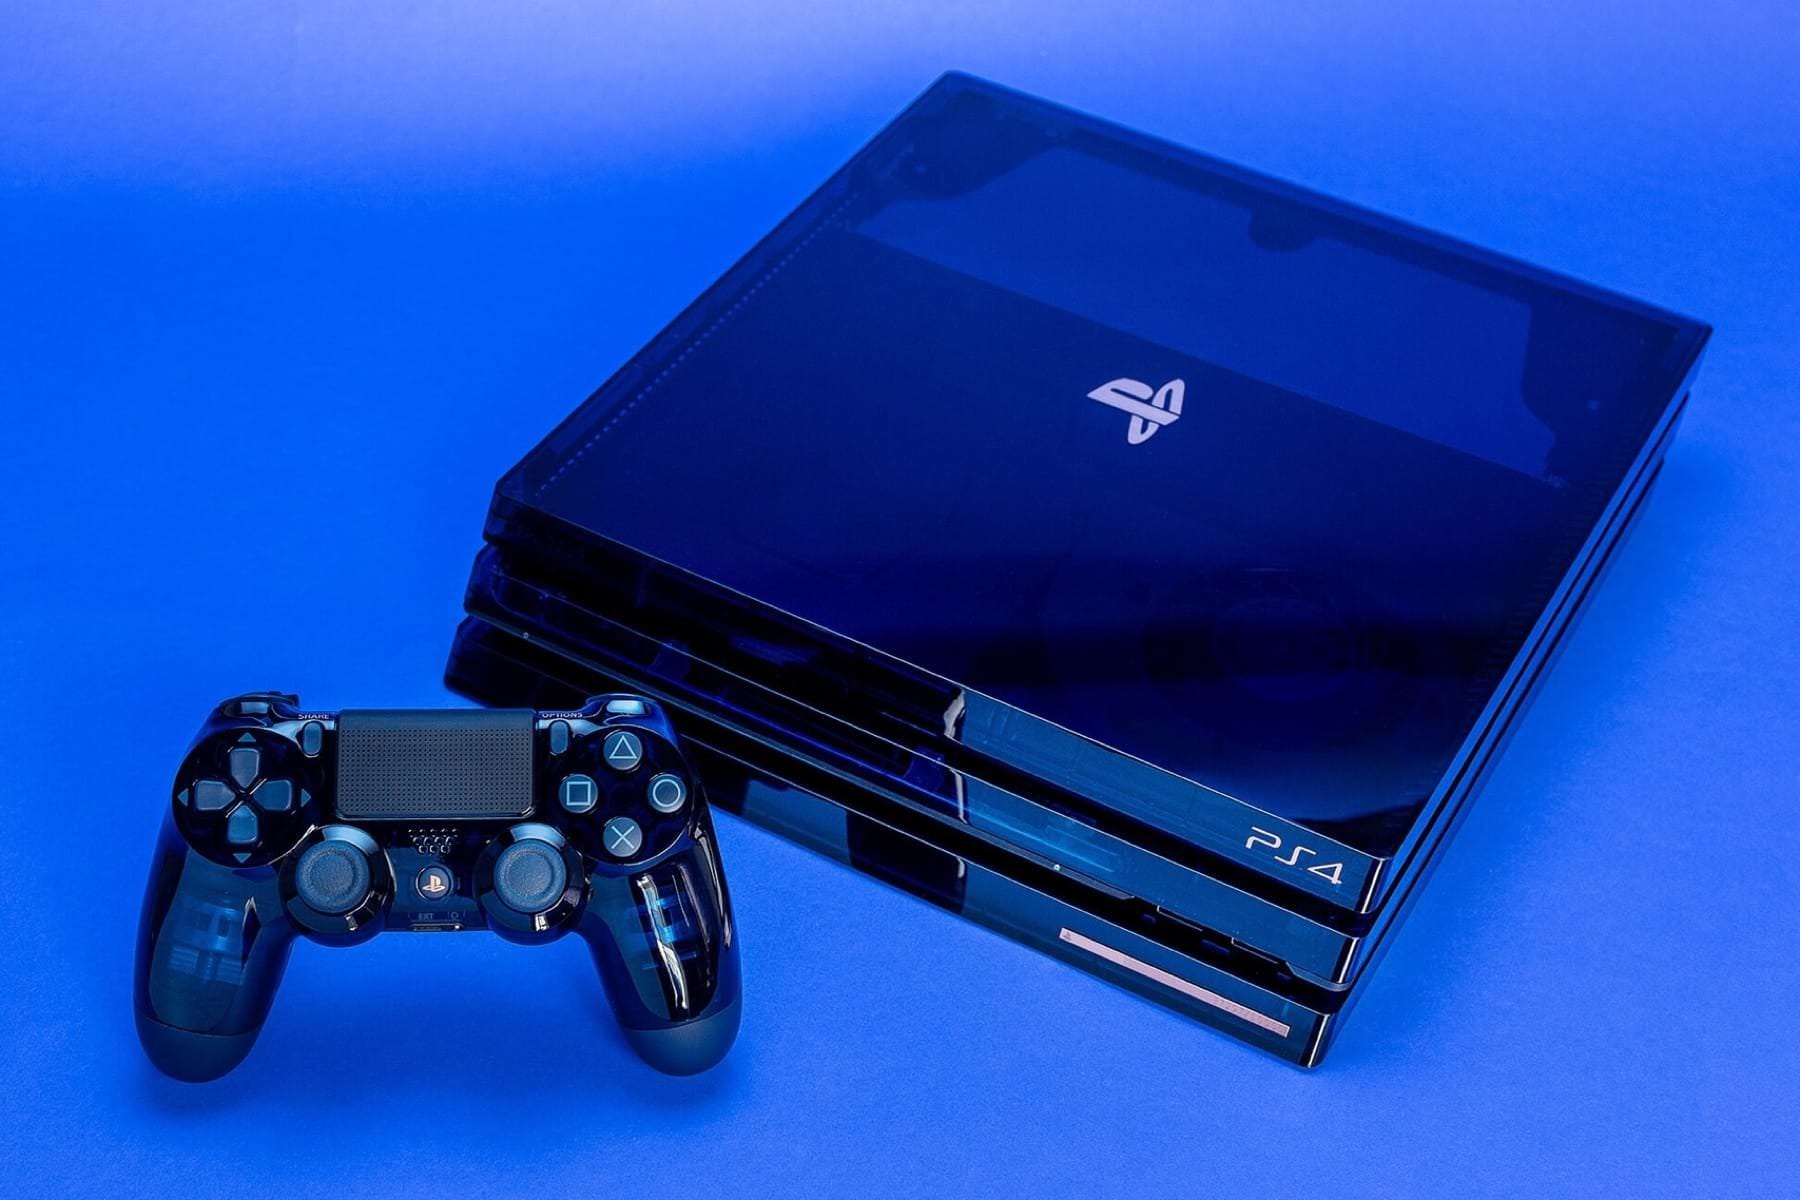 Крутые ps4. Сони ПС 4. Приставка Sony PLAYSTATION 5. Sony PLAYSTATION 5 Limited Edition. Ps4 Pro 500 million Limited Edition.